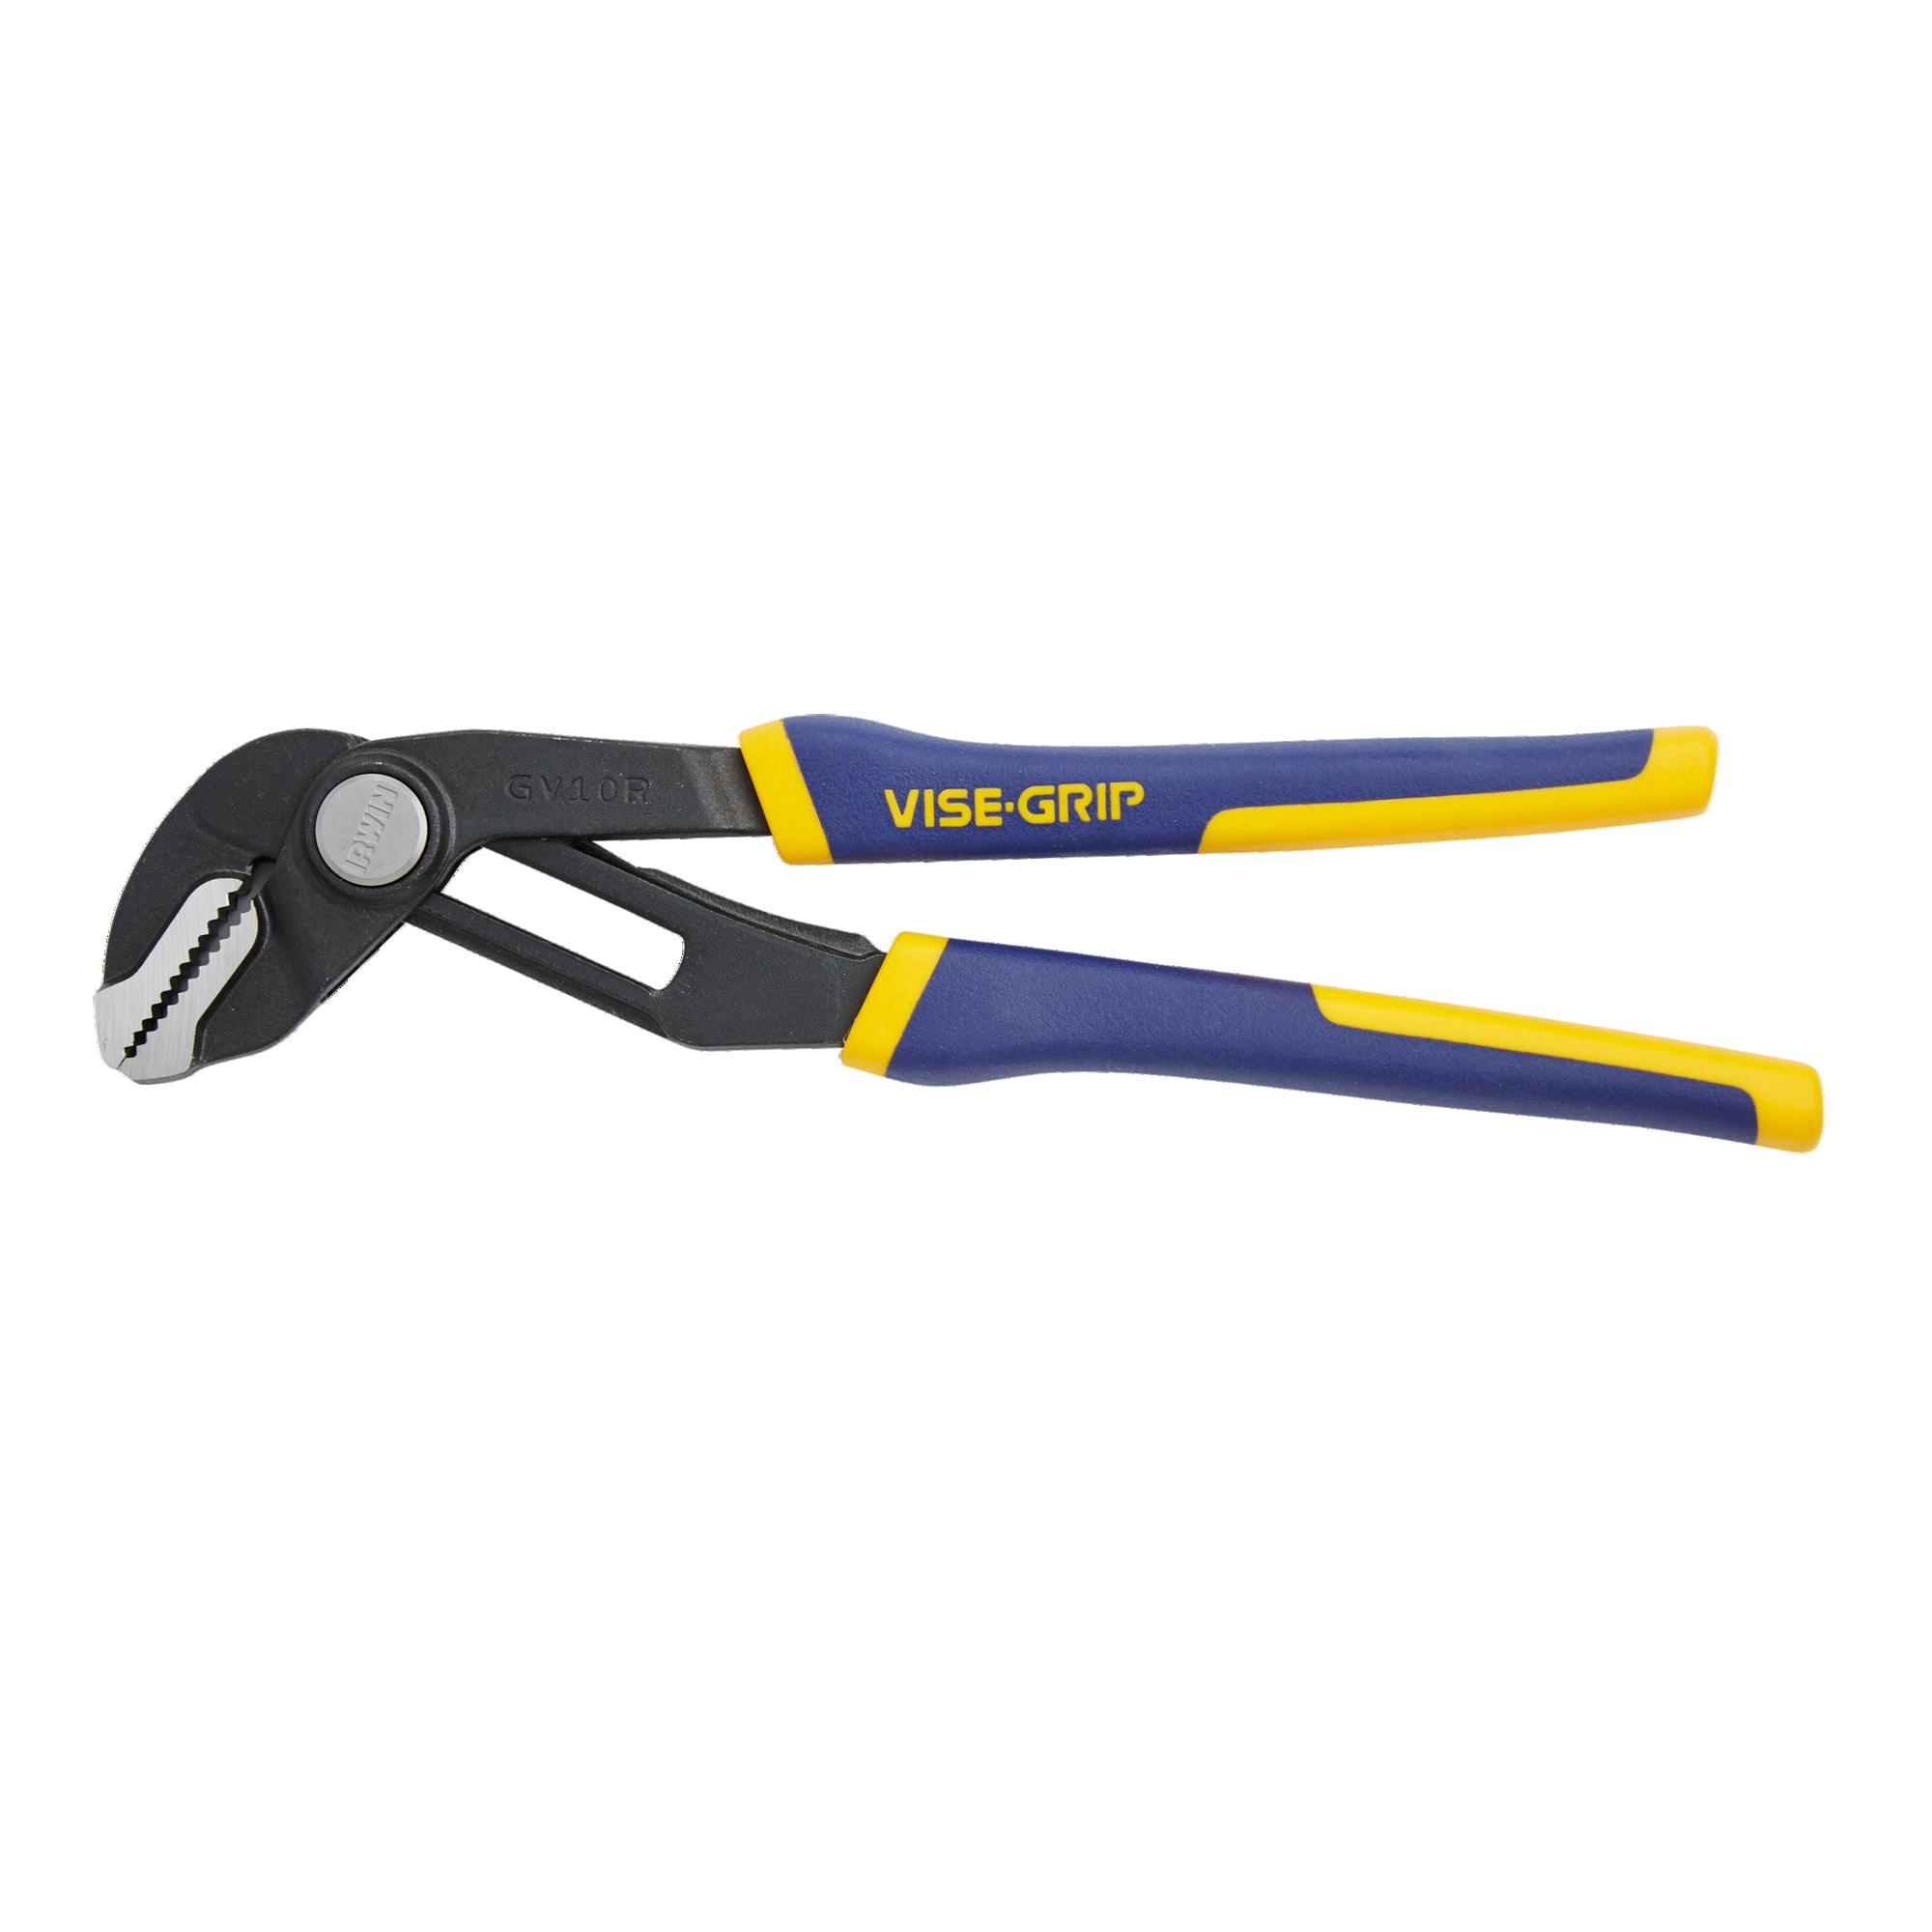 IRWIN WATER PUMP PLIERS 250mm 10" groove joint PRO TOUCH GRIPS VISE-GRIP 